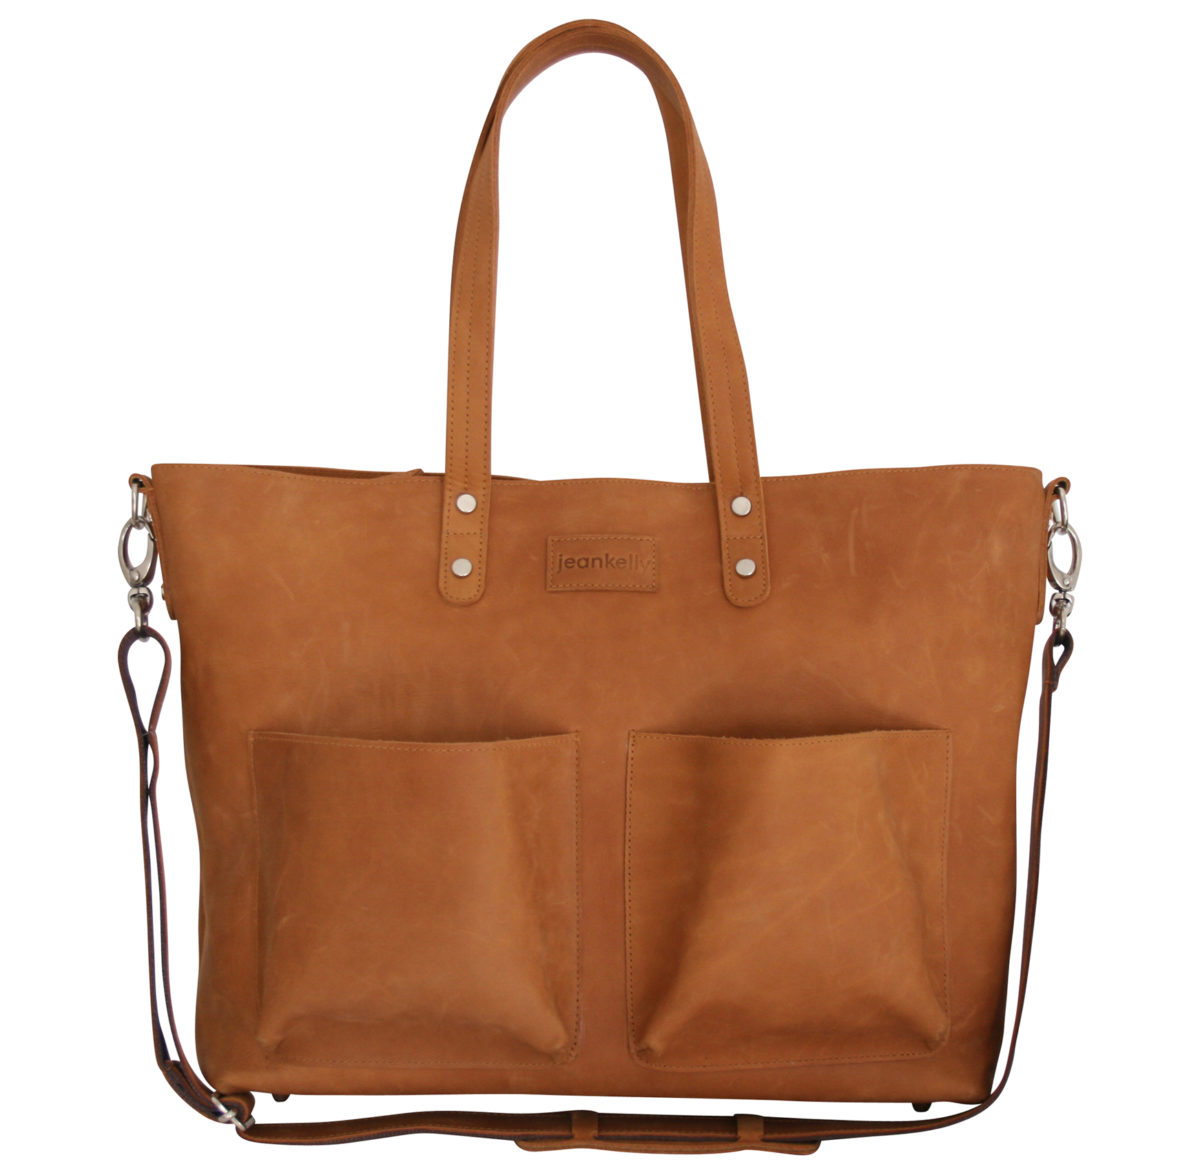 Jeankelly Bags Caramel Baby Bag